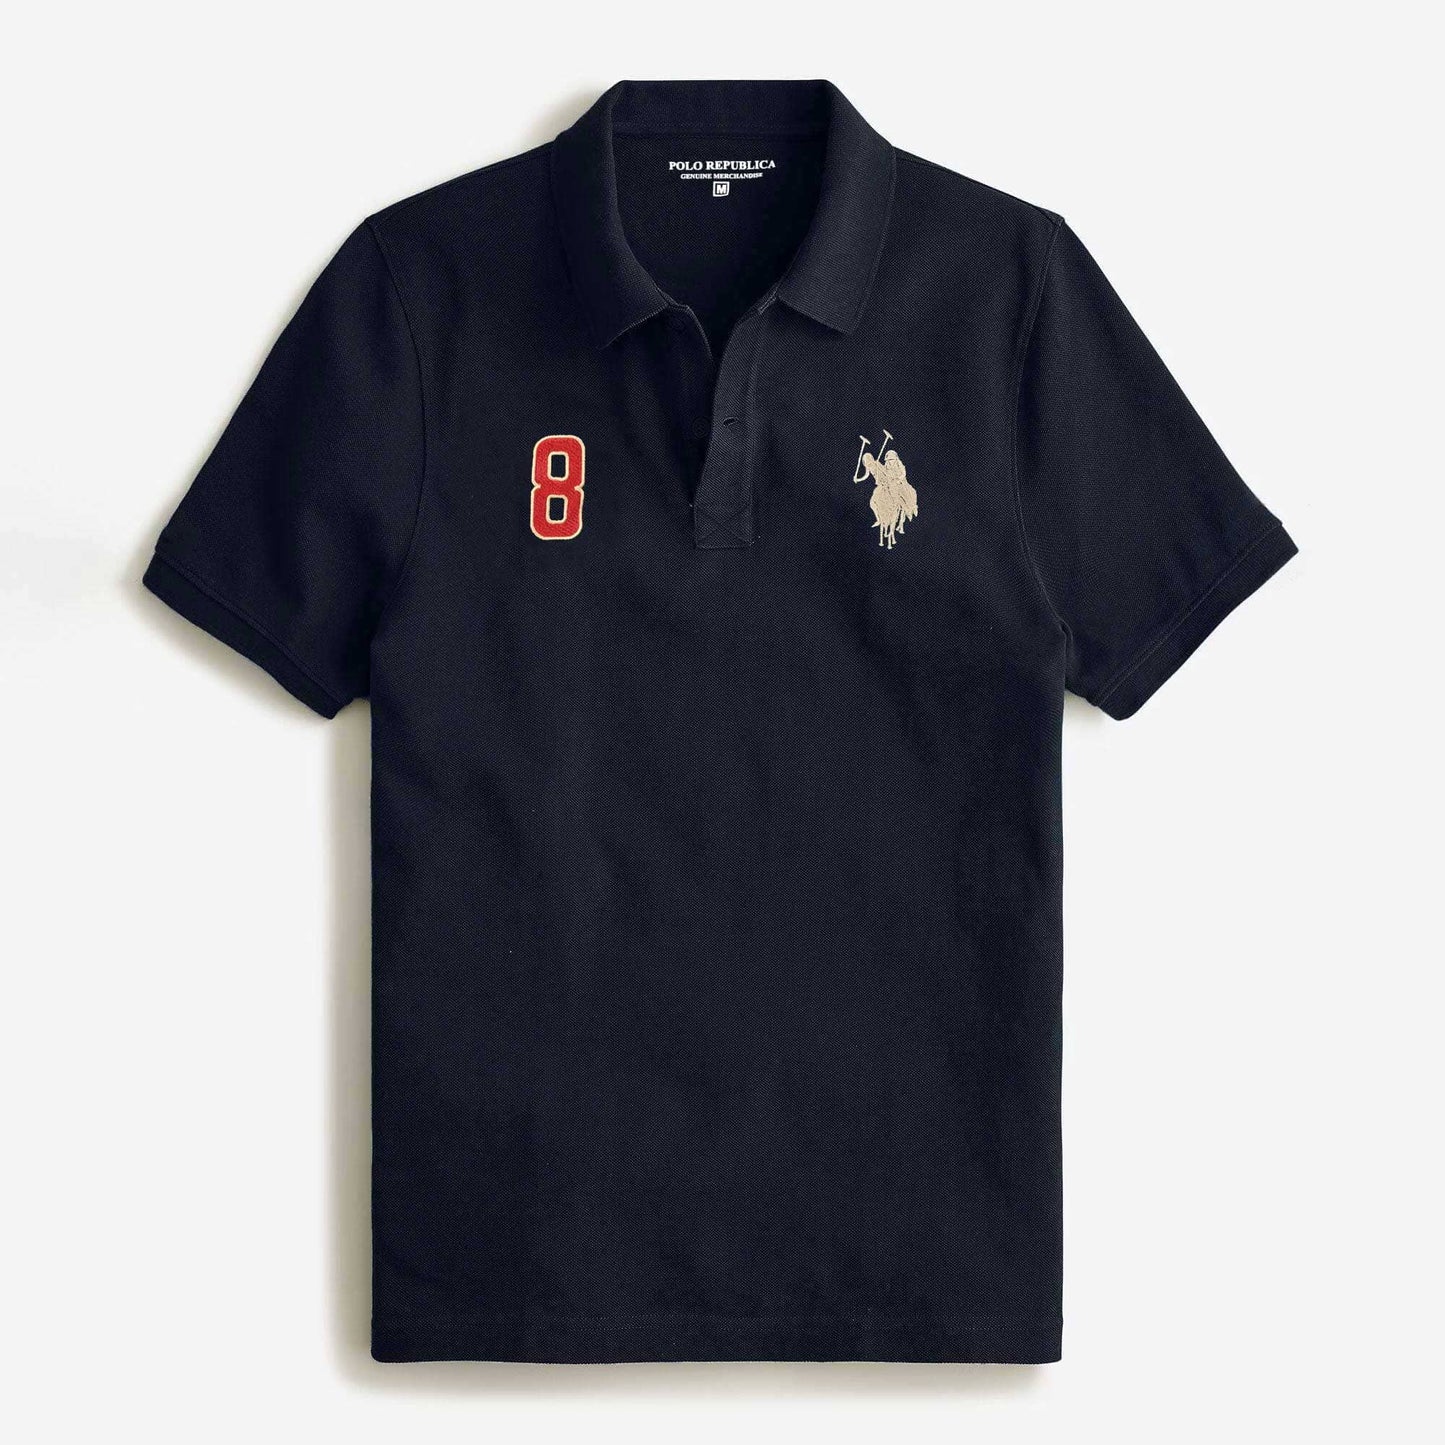 Polo Republica Men's Twin Pony & 8 Embroidered Short Sleeve Polo Shirt